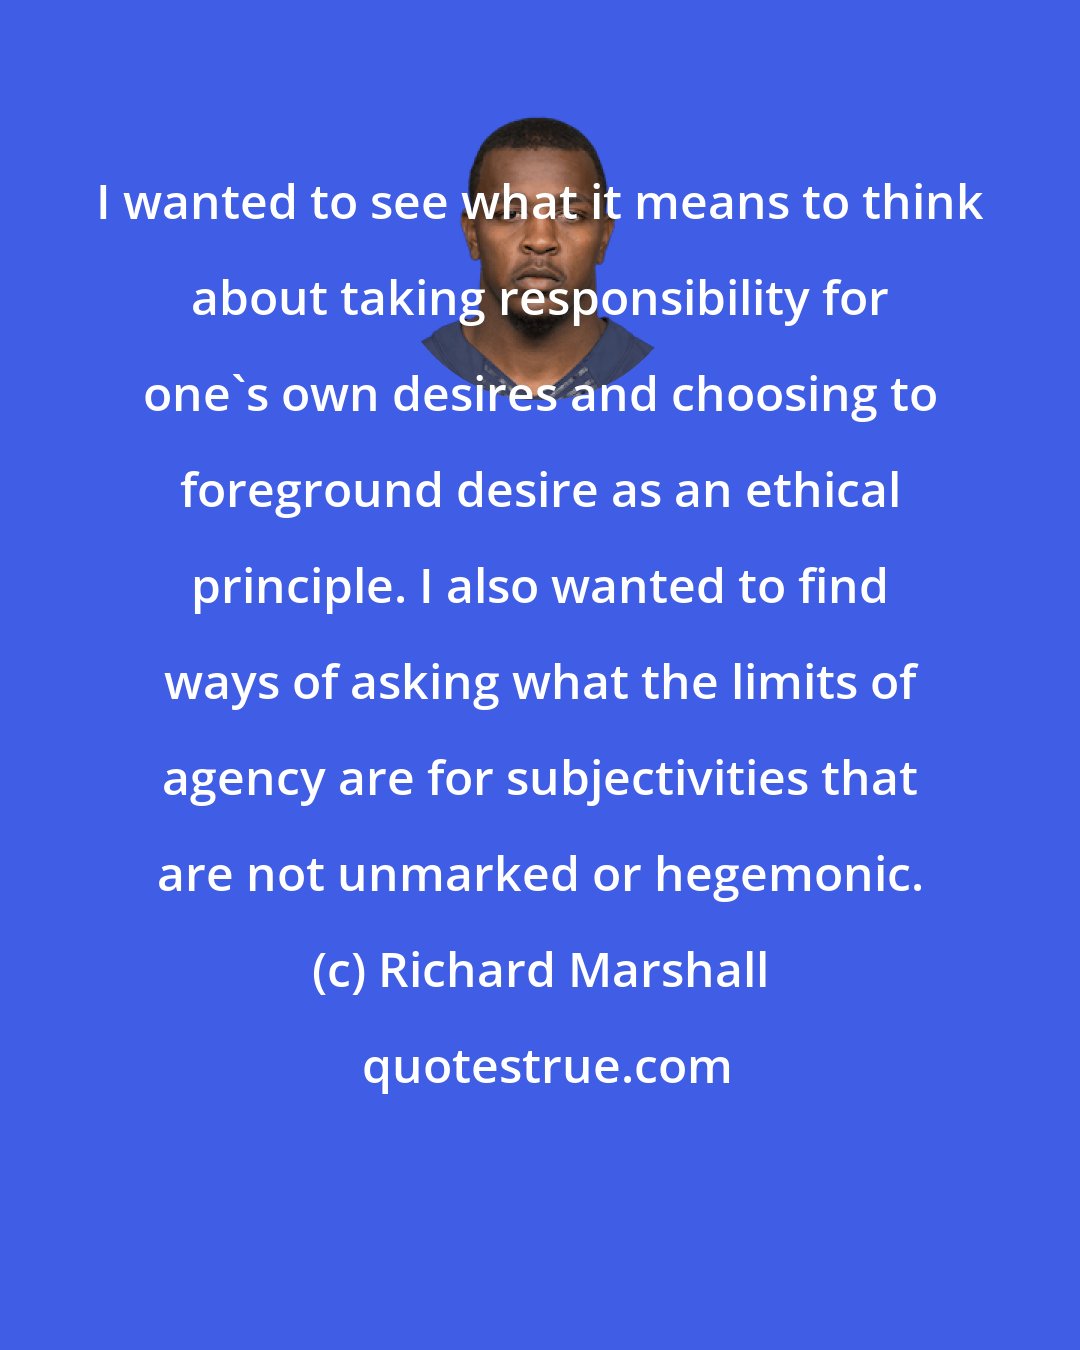 Richard Marshall: I wanted to see what it means to think about taking responsibility for one's own desires and choosing to foreground desire as an ethical principle. I also wanted to find ways of asking what the limits of agency are for subjectivities that are not unmarked or hegemonic.